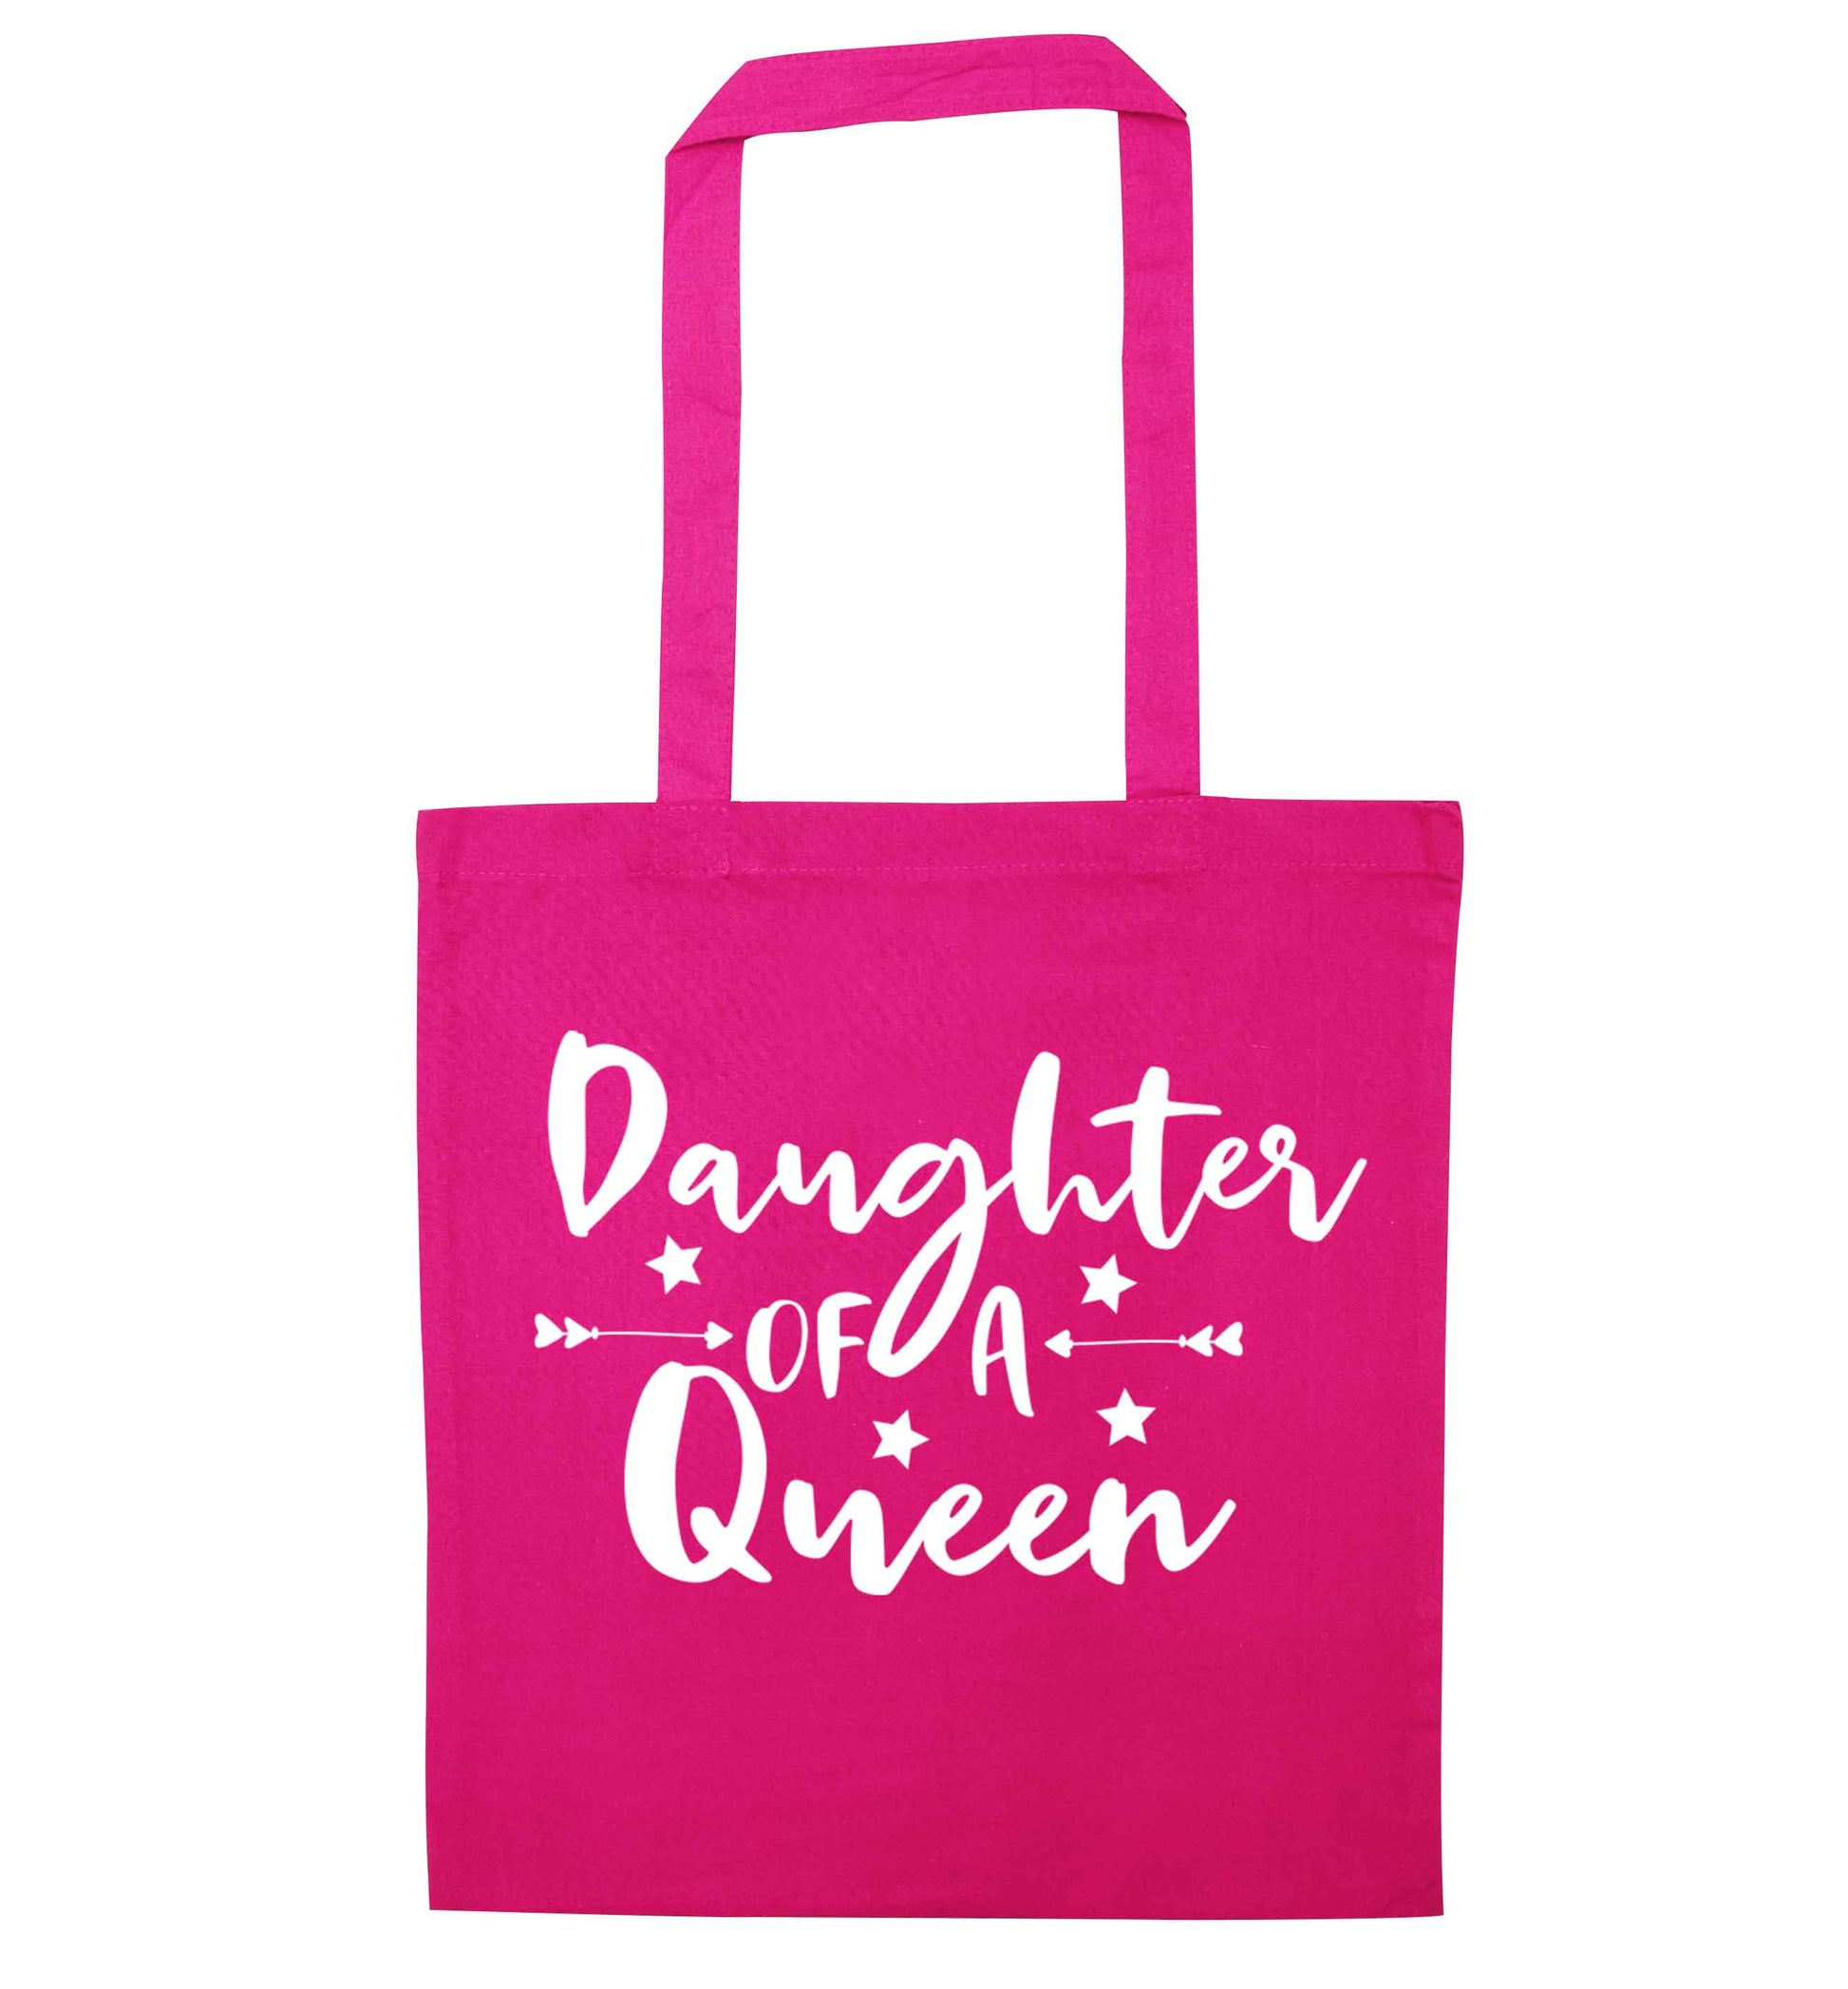 Daughter of a Queen pink tote bag